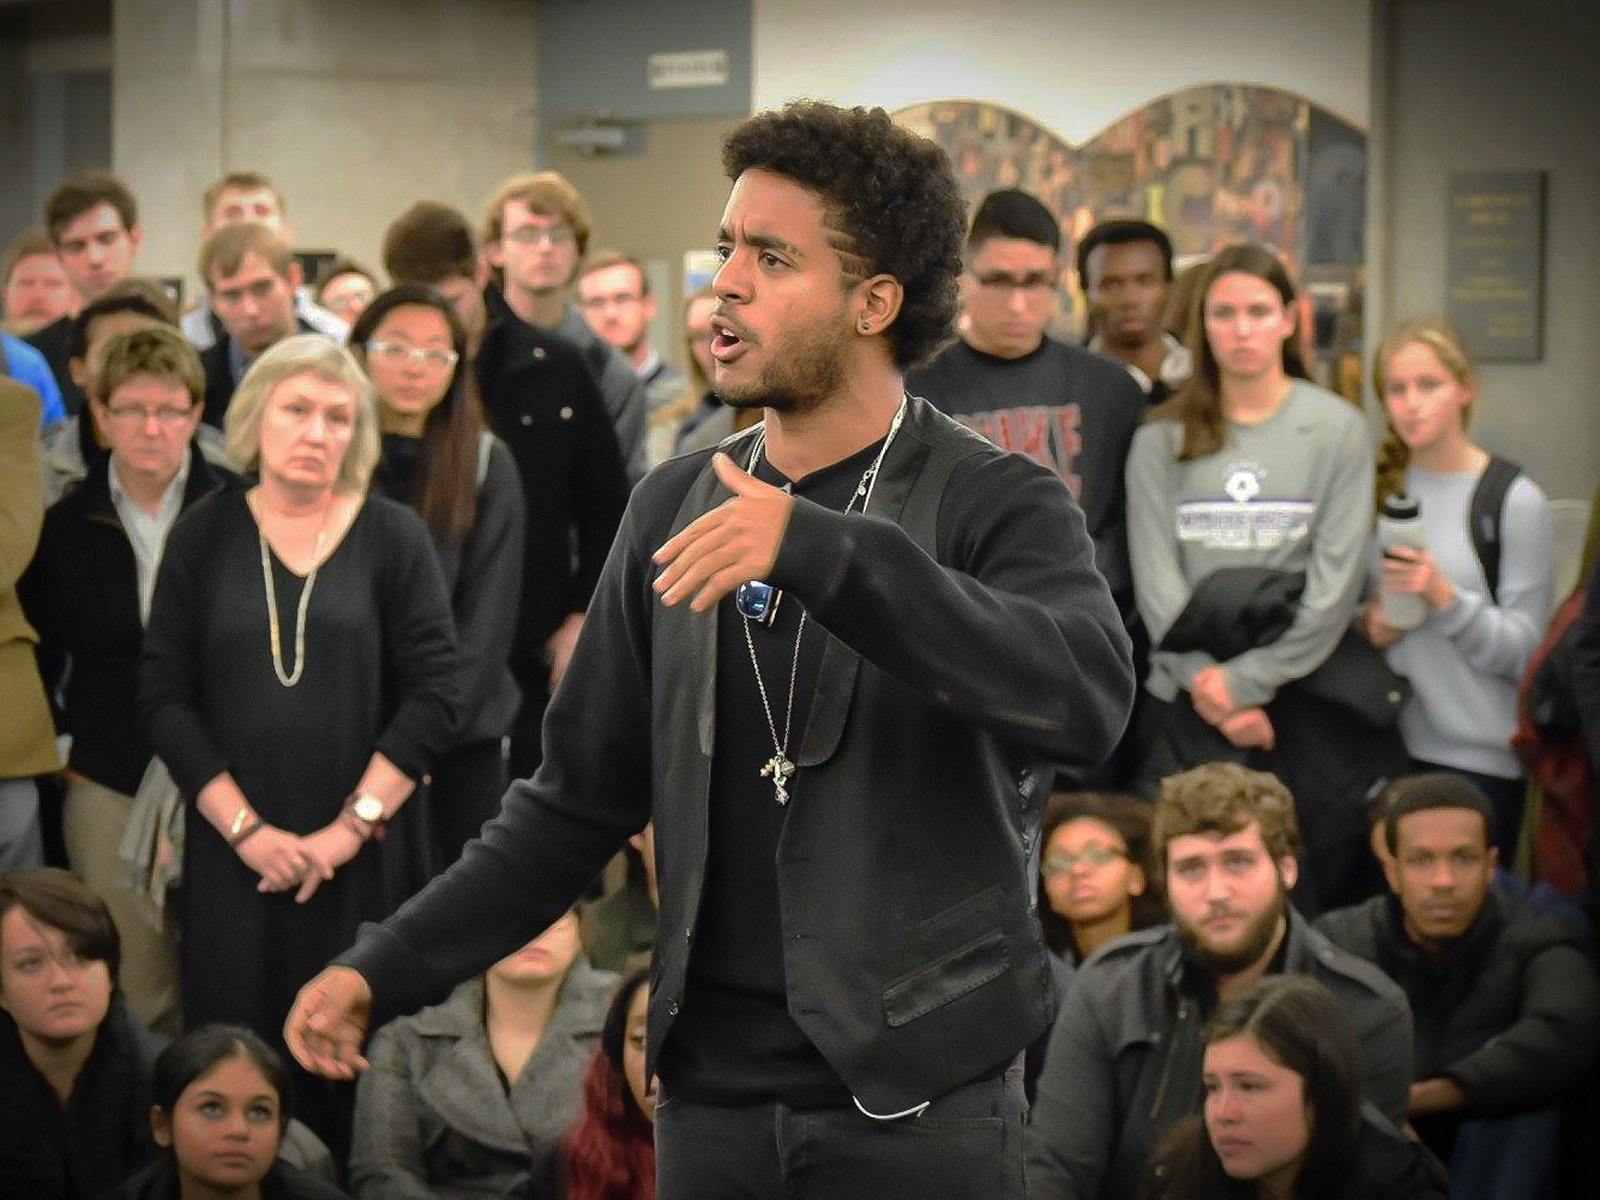 A young Black man speaking in front of a group of people